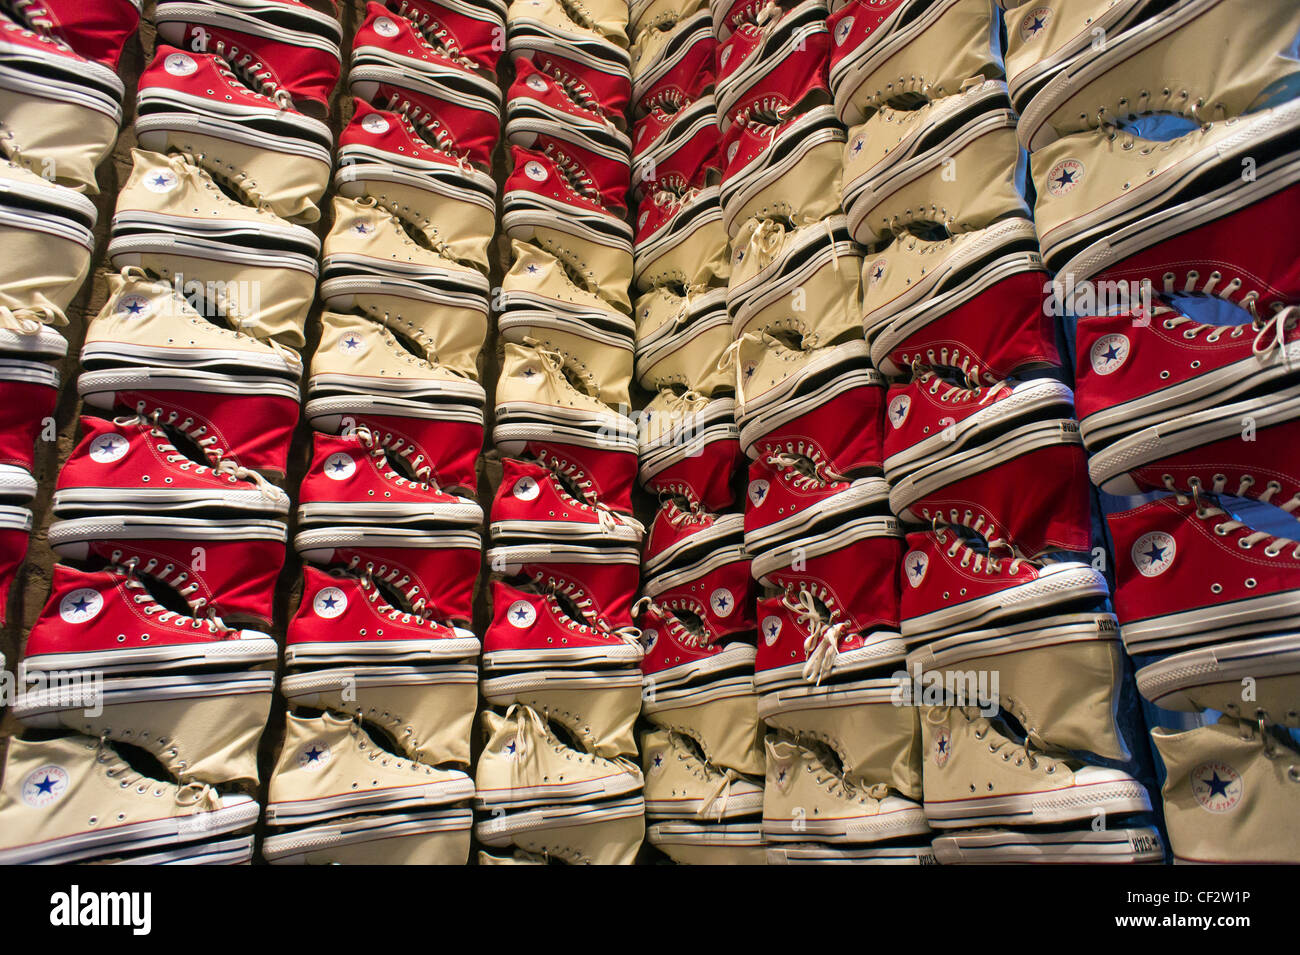 converse outlet freeport